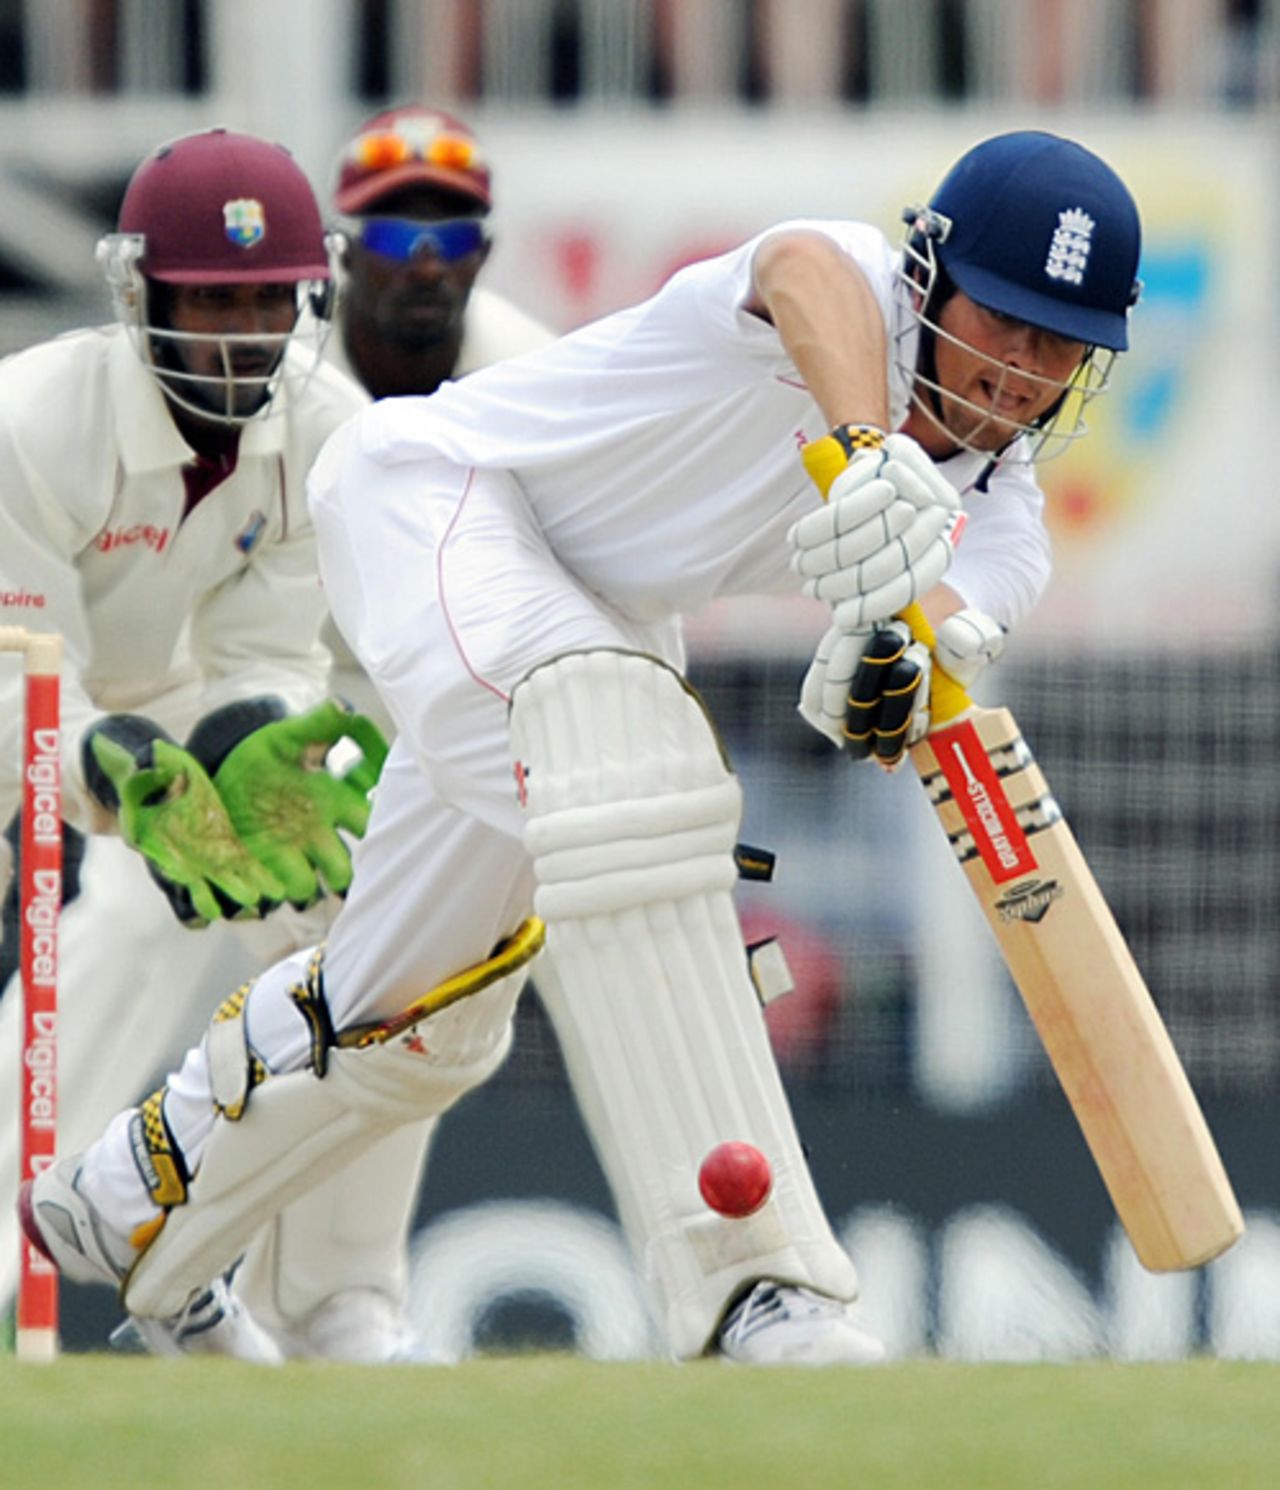 Alastair Cook nurdles a spinner to leg, West Indies v England, 3rd Test, Antigua, February 15, 2009